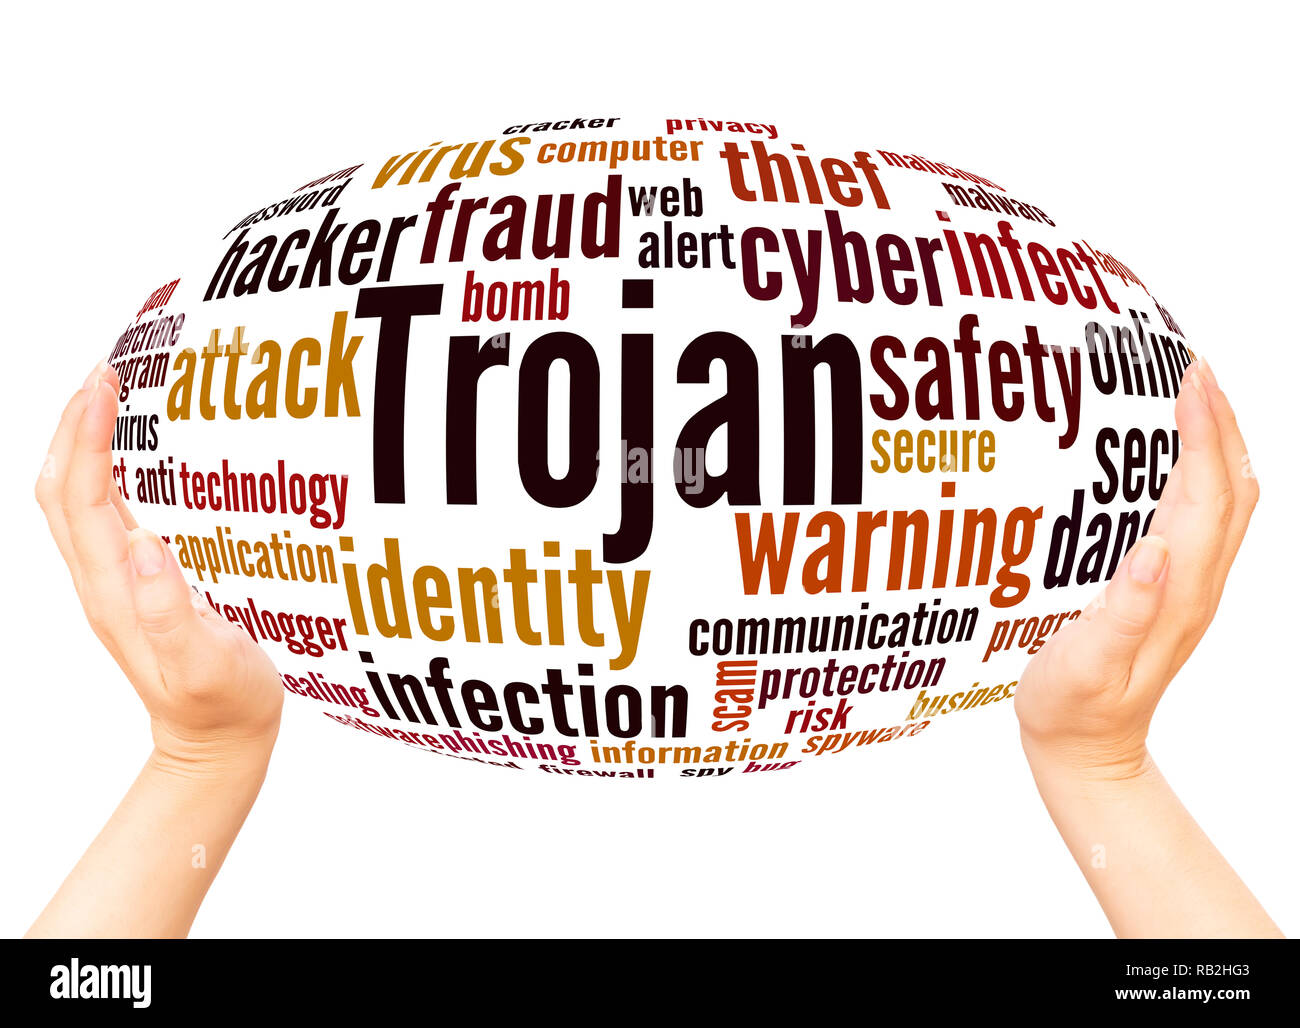 Trojan word cloud hand sphere concept on white background. Stock Photo